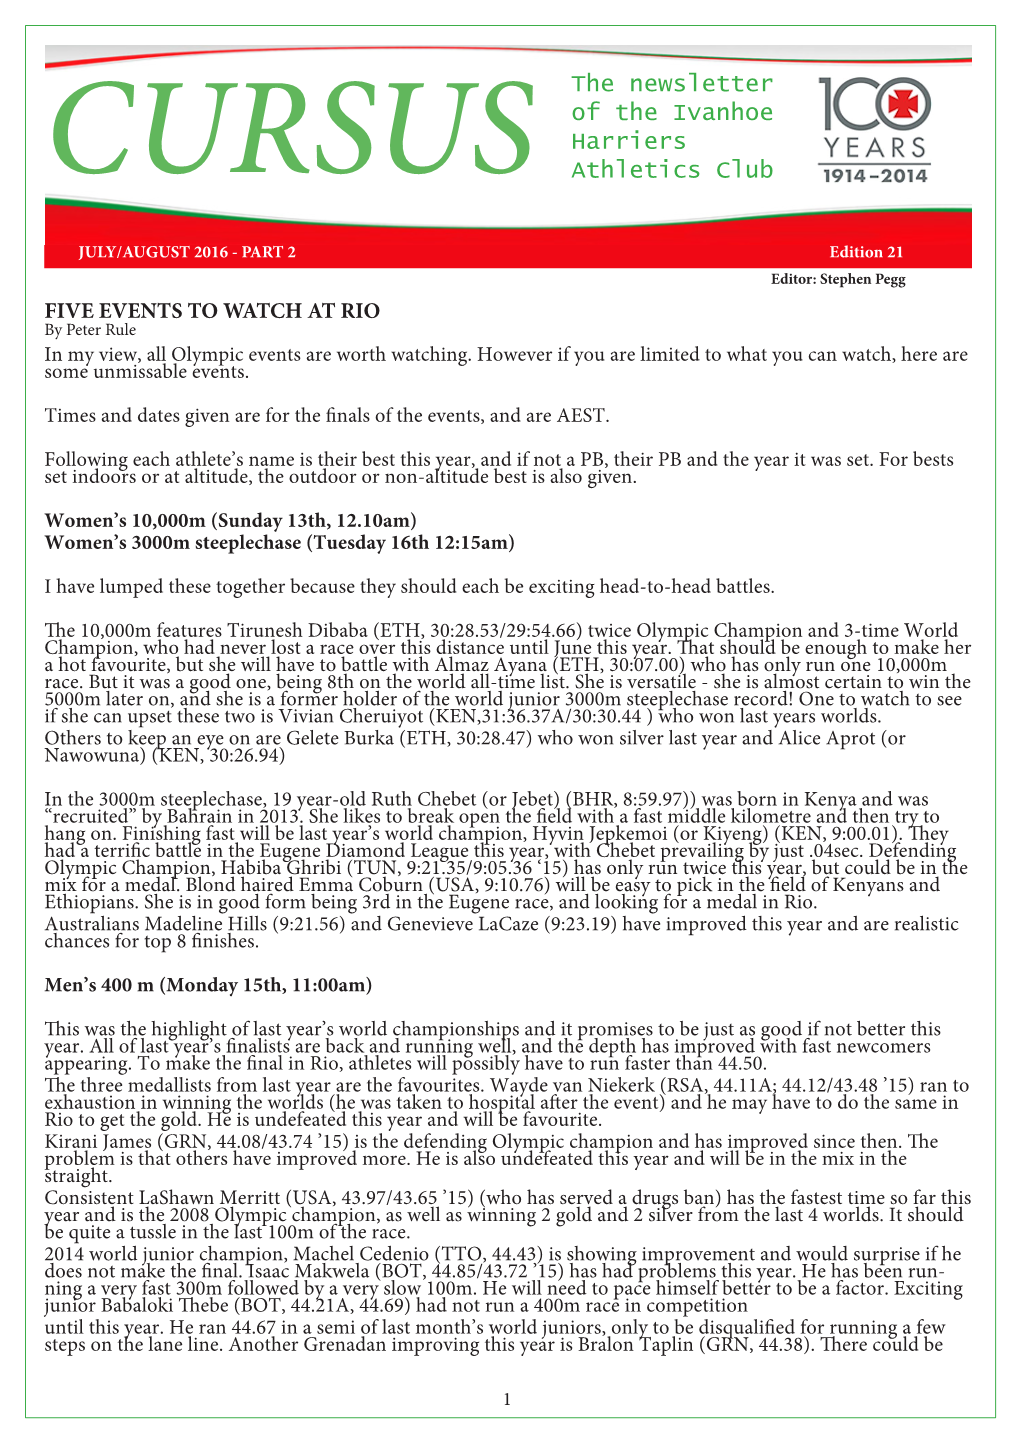 CURSUS the Newsletter of the Ivanhoe Harriers Athletics Club